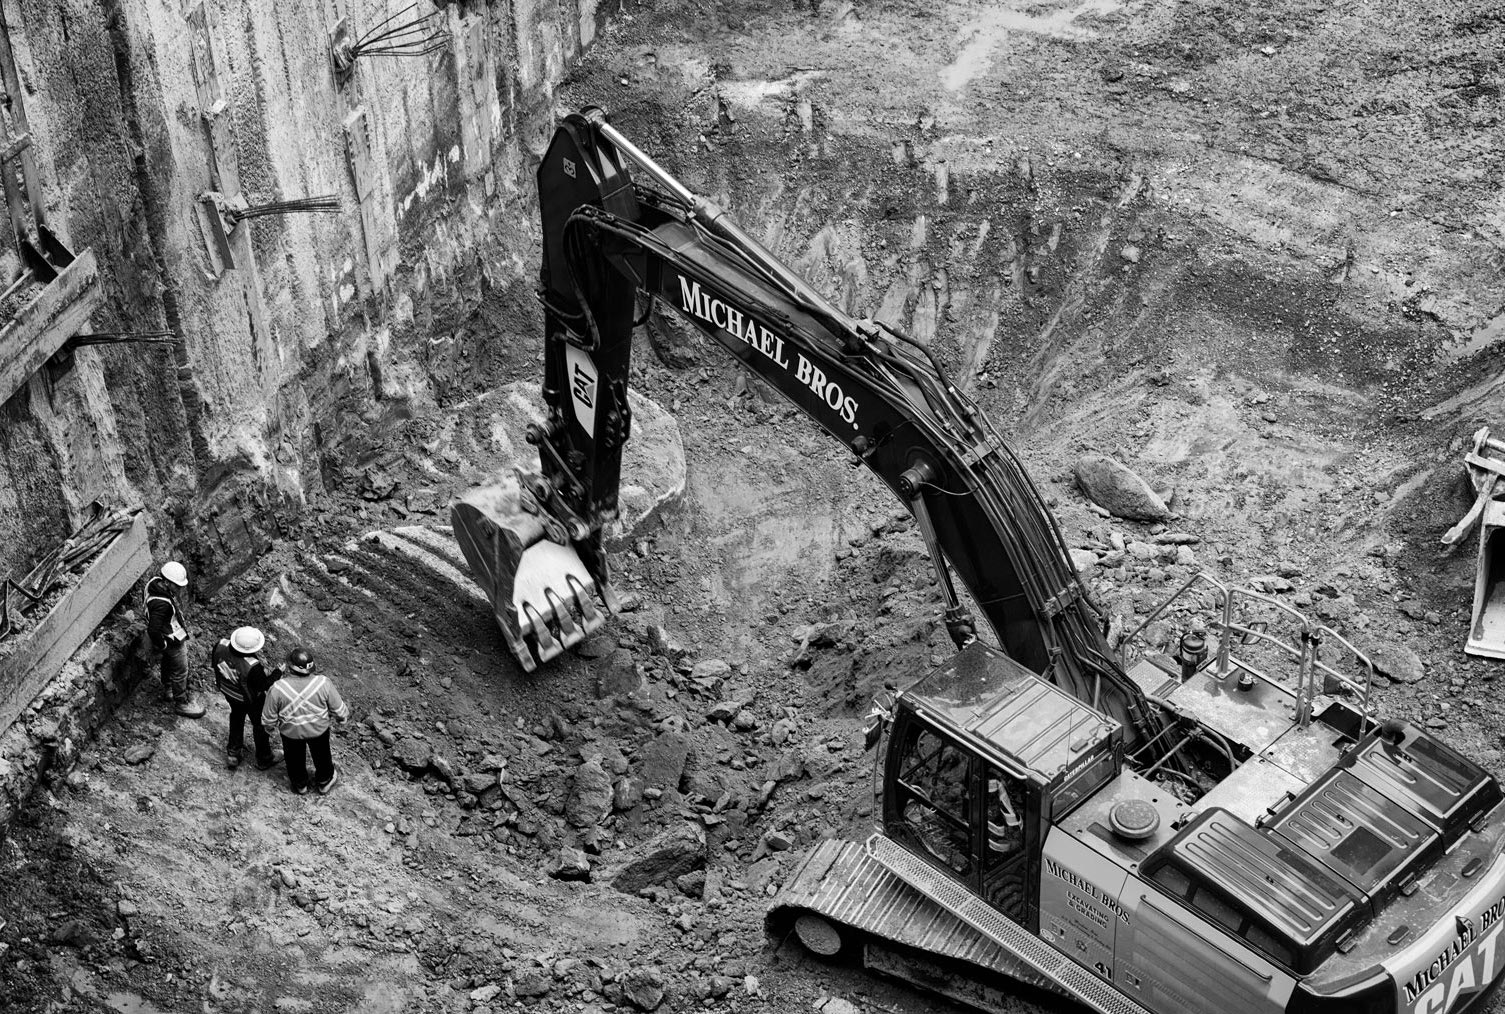 Retro excavator digging on a construction site - The One